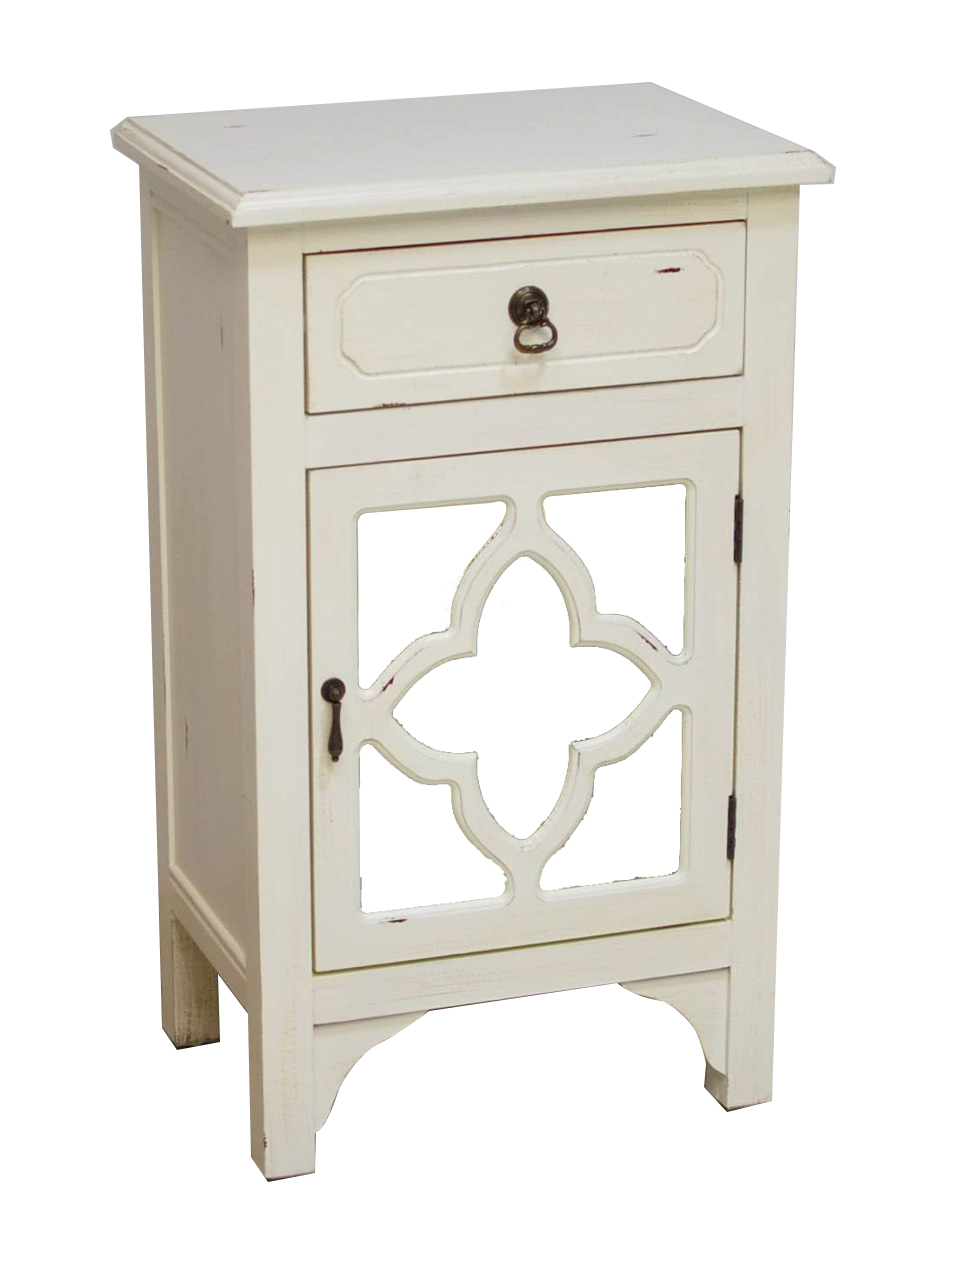 18" X 13" X 30" Antique White MDF Wood Mirrored Glass Cabinet with a Drawer and a Door